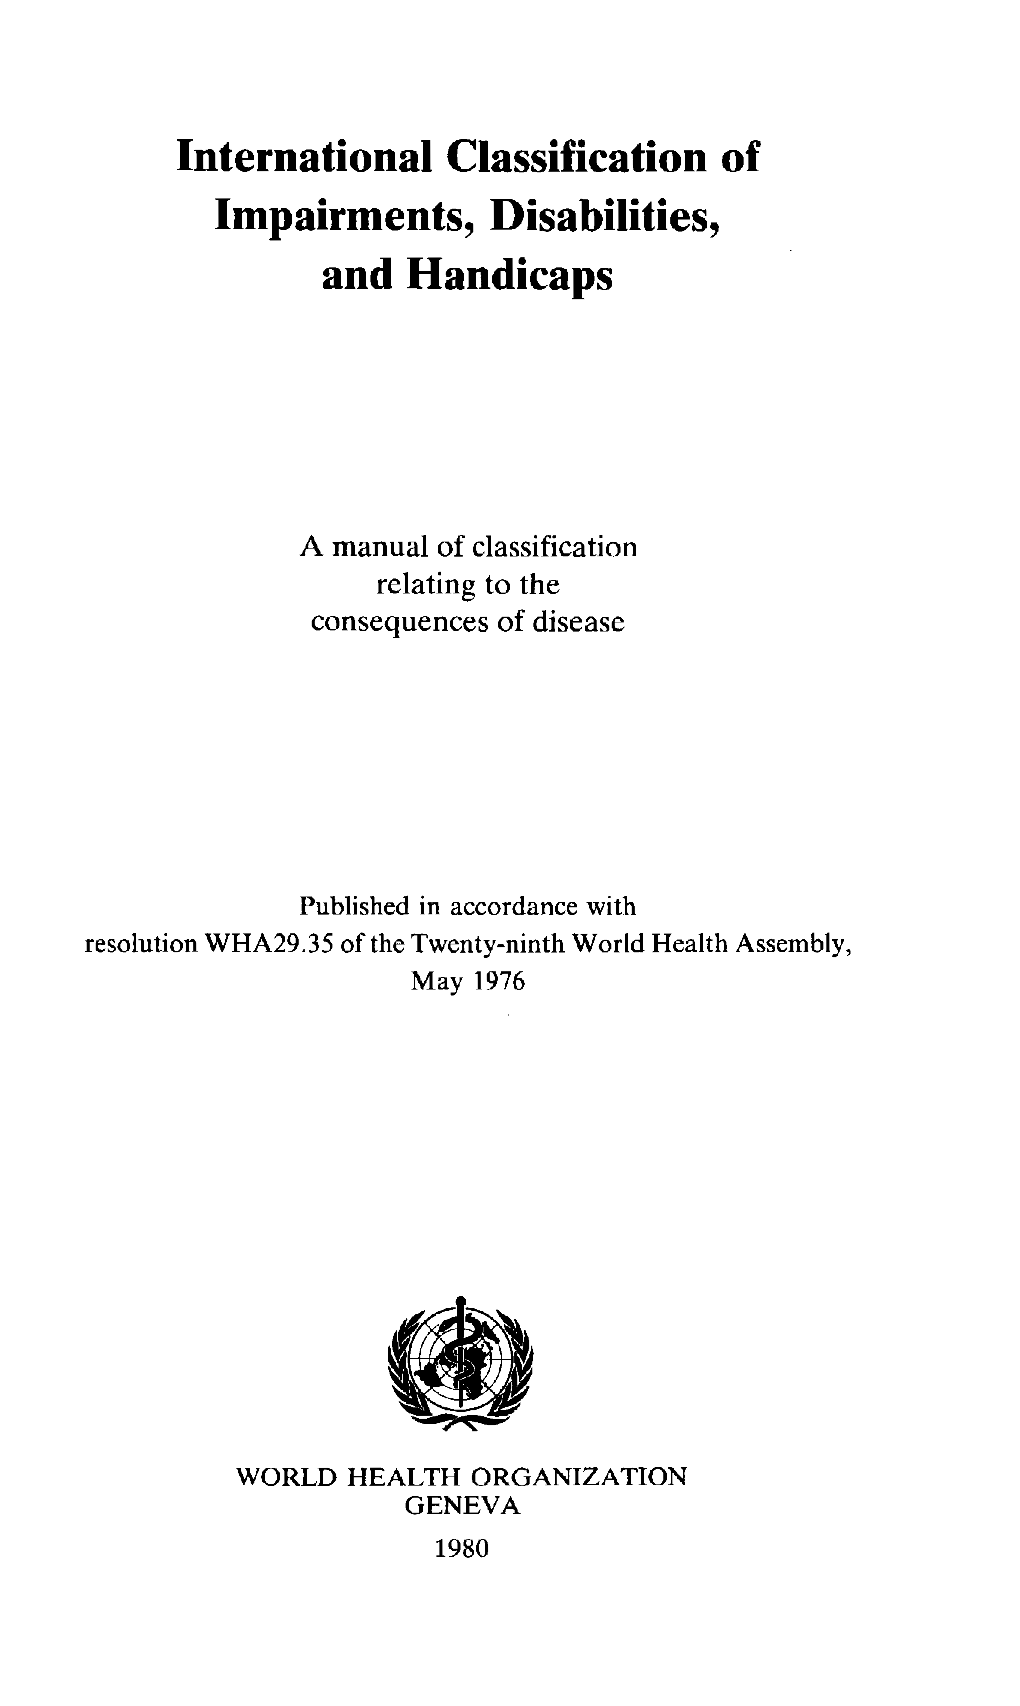 International Classification of Impairments, Disabilities, and Handicaps